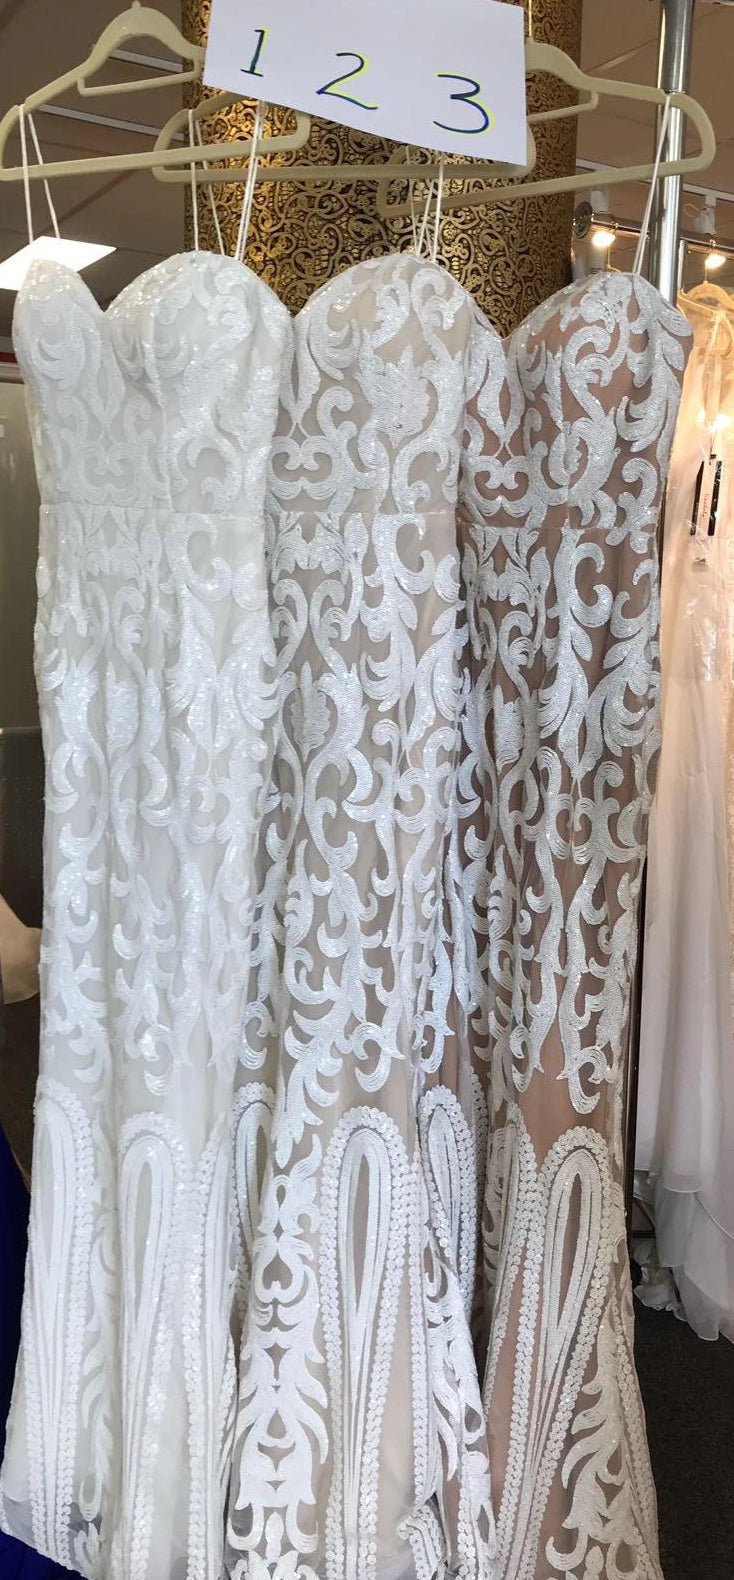 Tinaholy Couture T17101 White Nude Sequin Thin Strap Gown Tina Holly Couture$ AfterPay Humm ZipPay LayBuy Sezzle